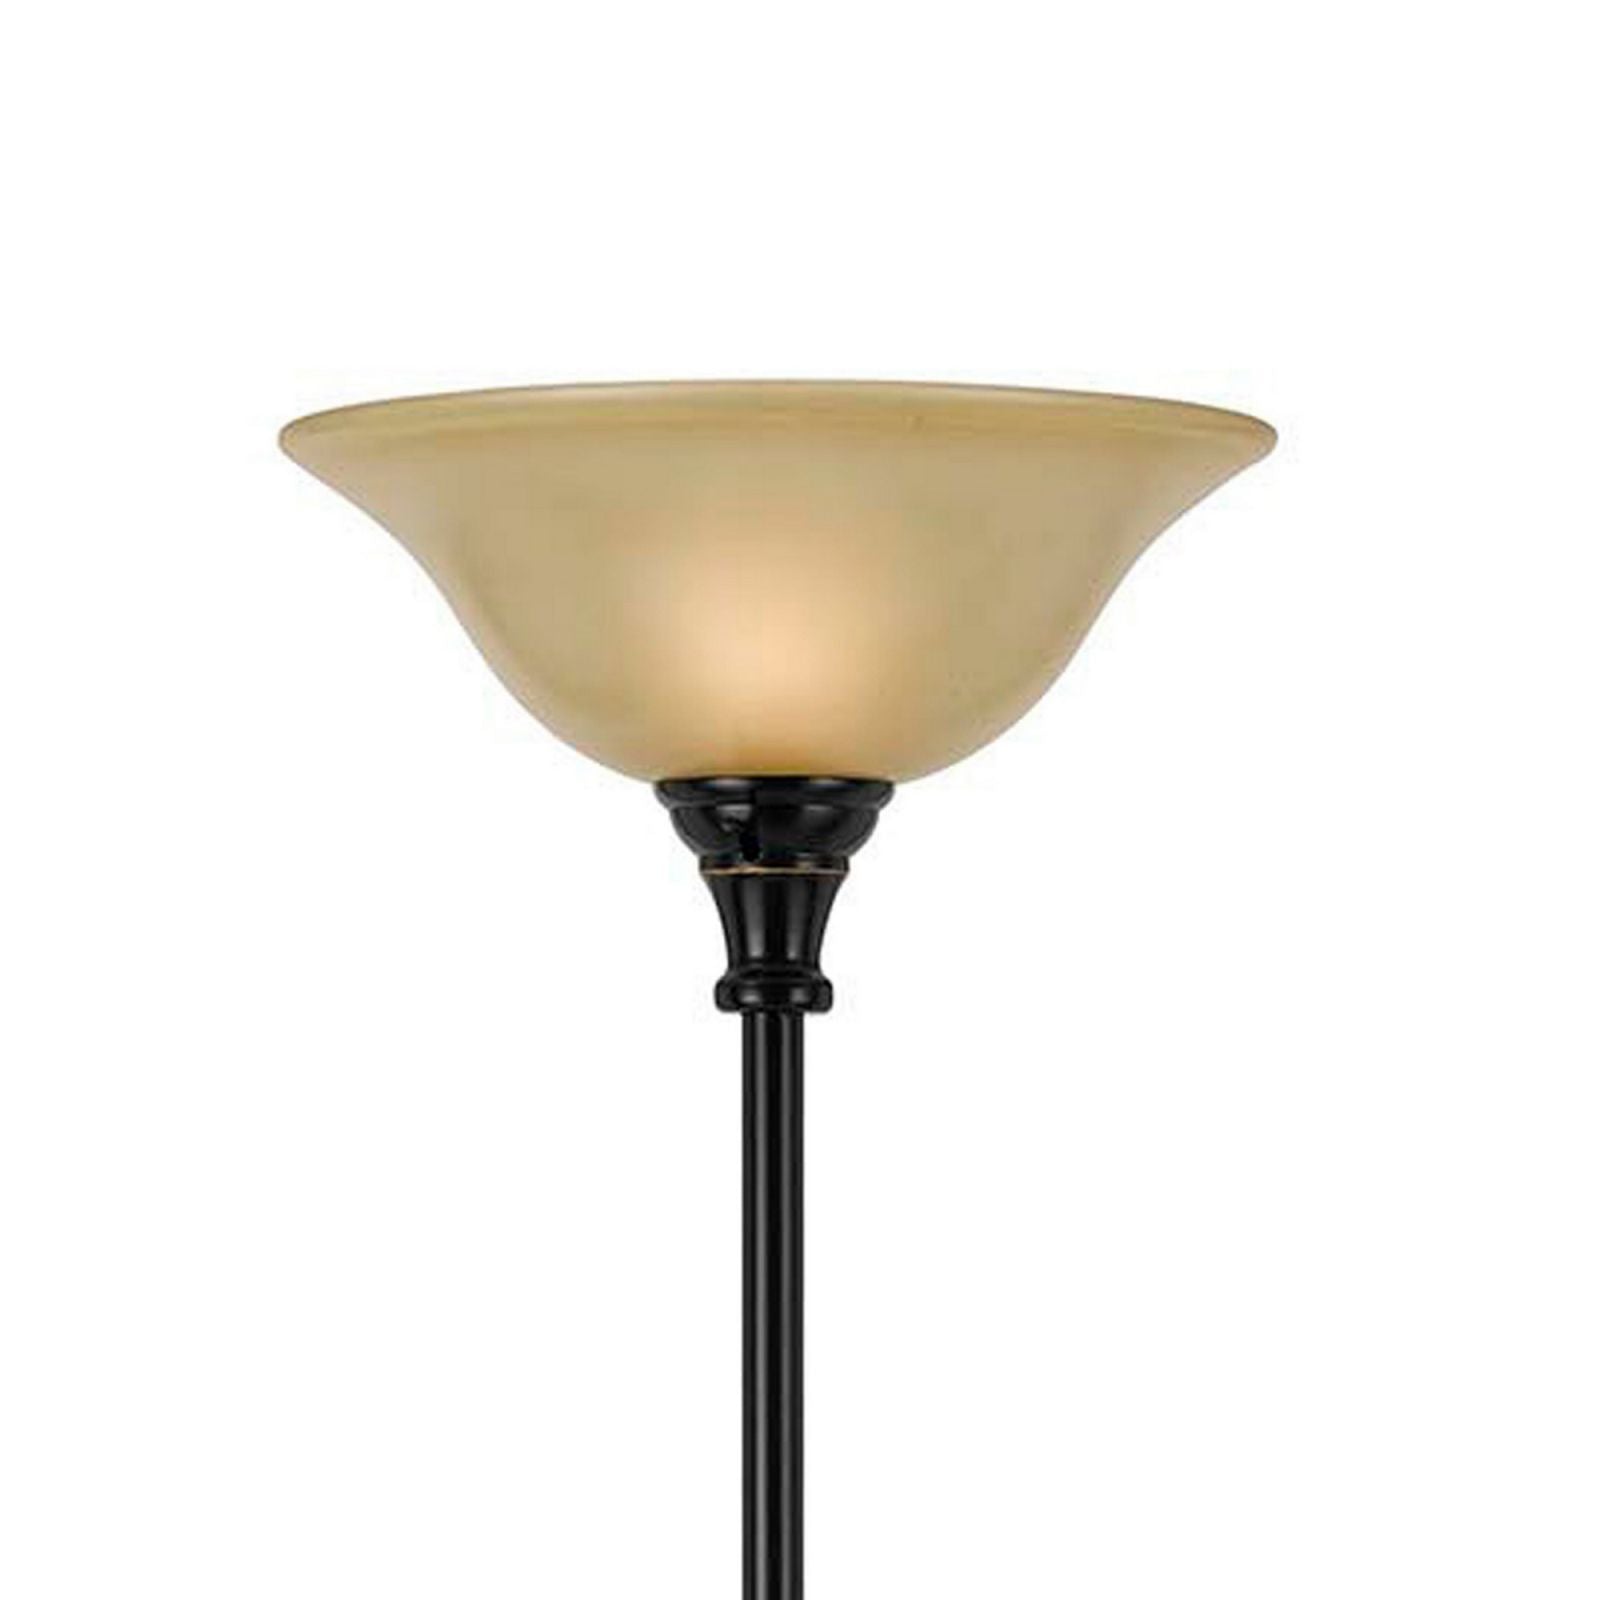 Metal Body Torchiere Floor Lamp With Attached Reading Light, Black By Benzara